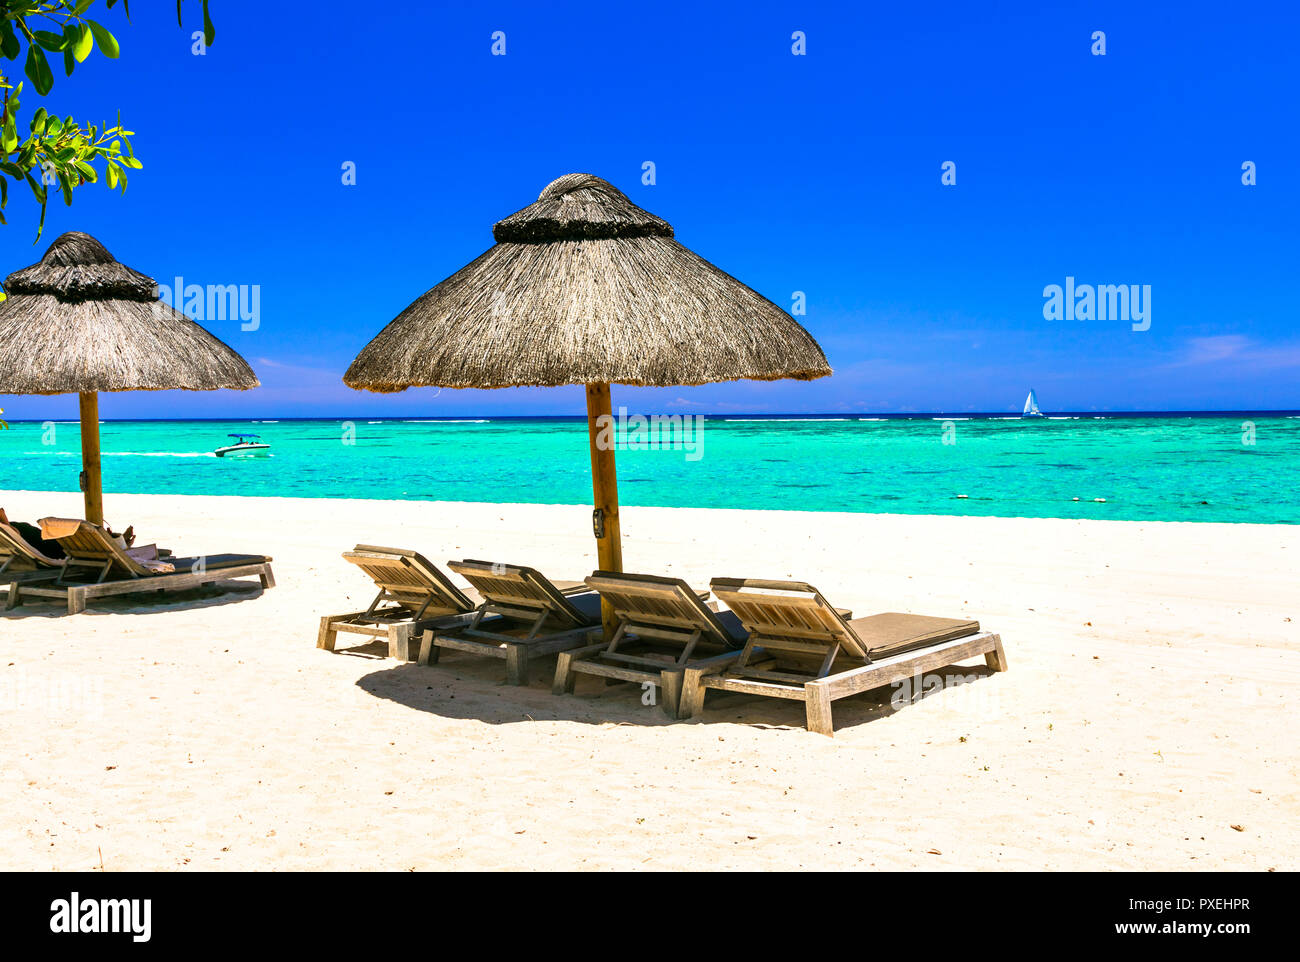 Tropical holidays in Mauritius island,view with azure sea and umbrellas. Stock Photo